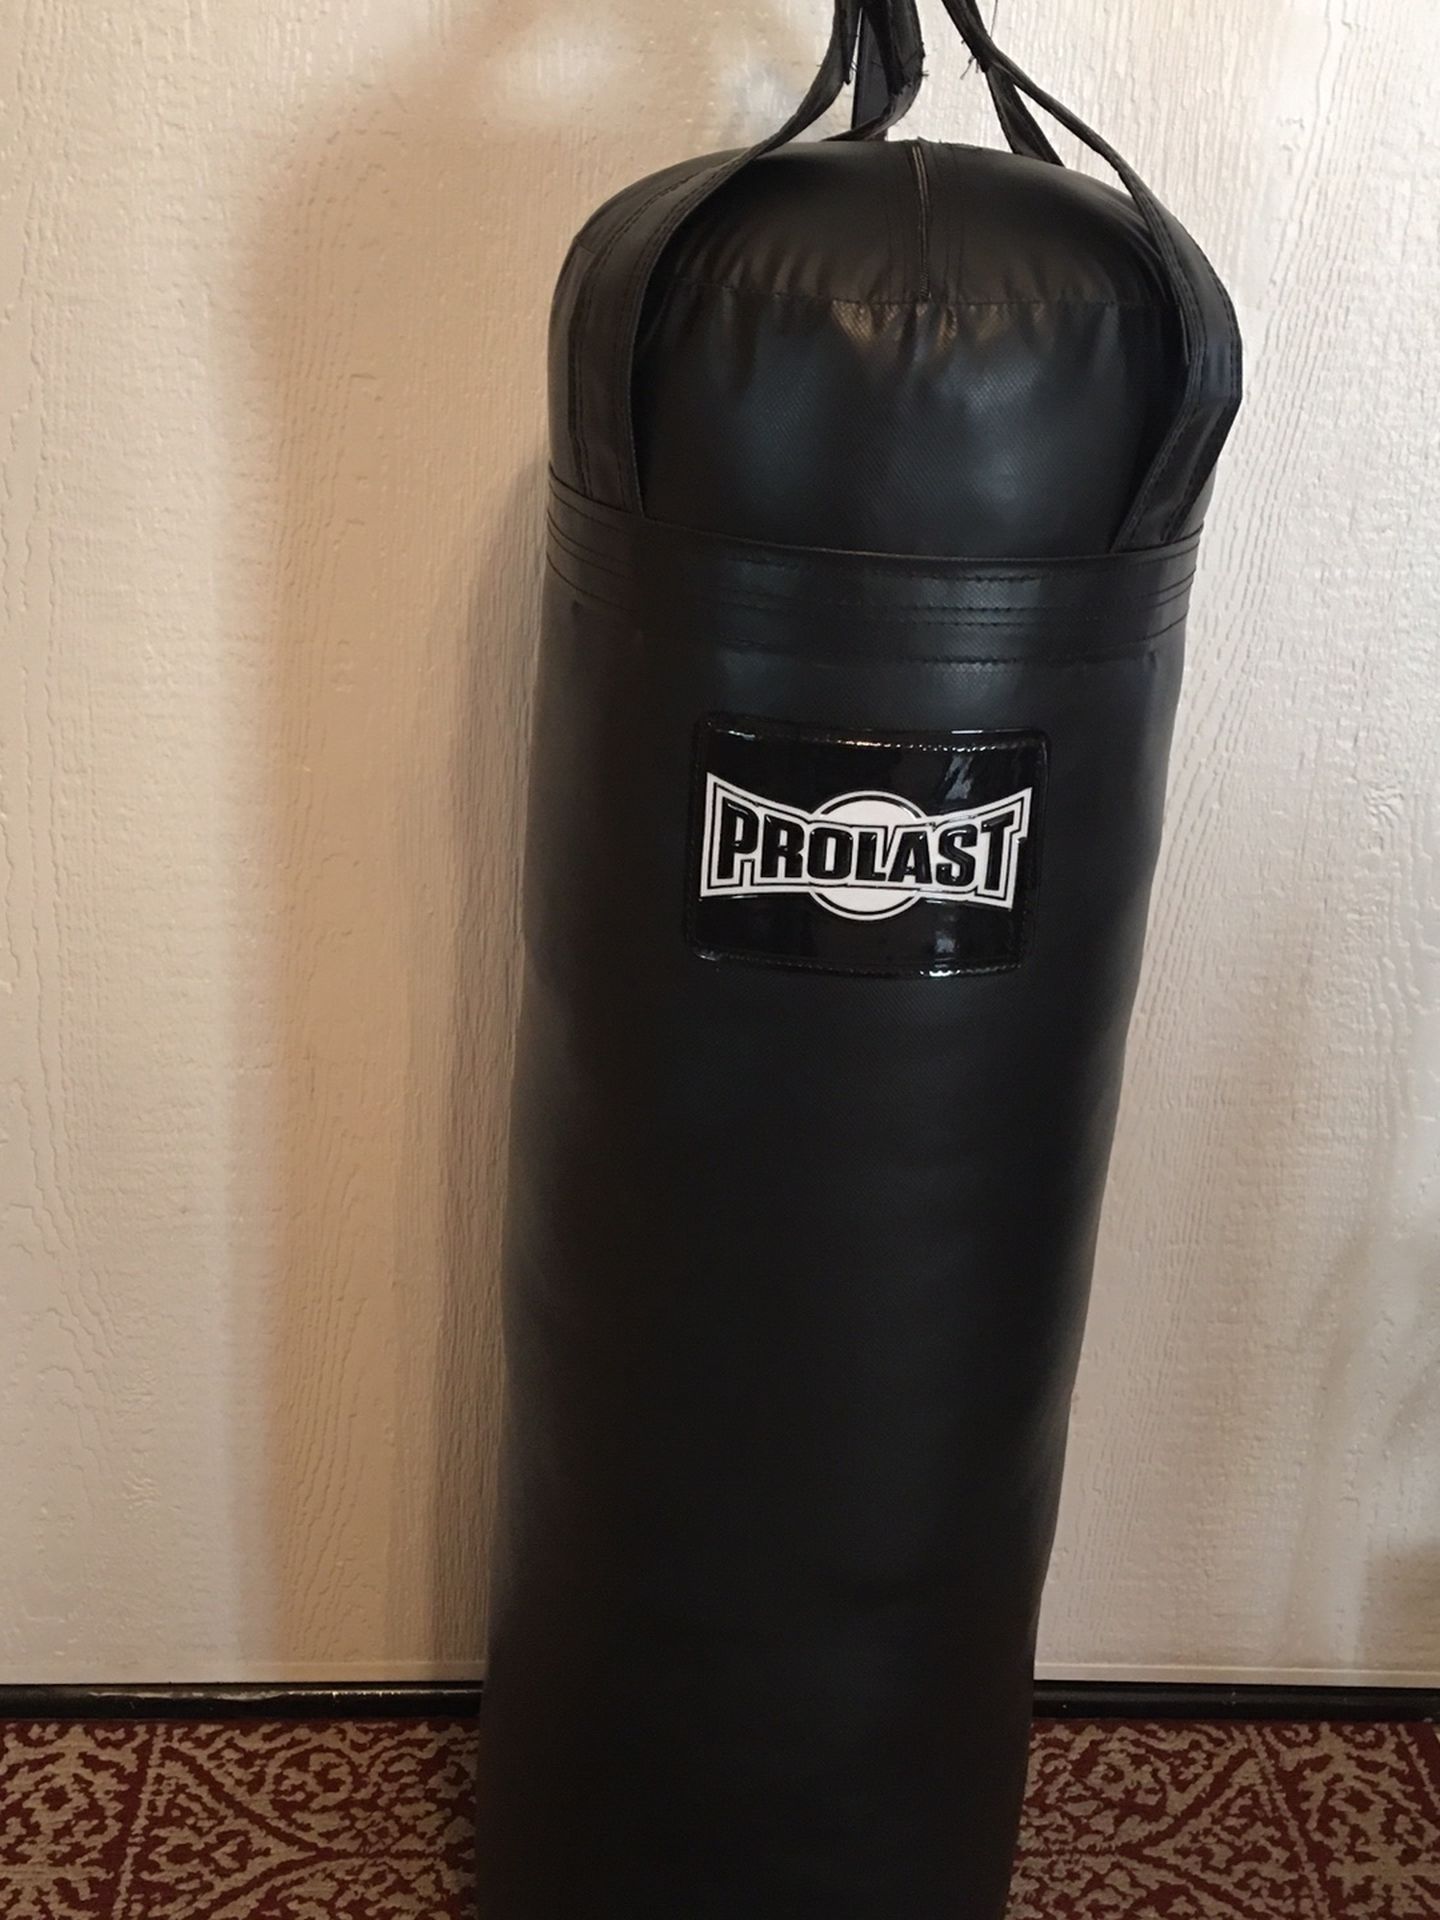 PUNCHING BAG BRAND NEW 70 POUNDS FILLED LUXURY